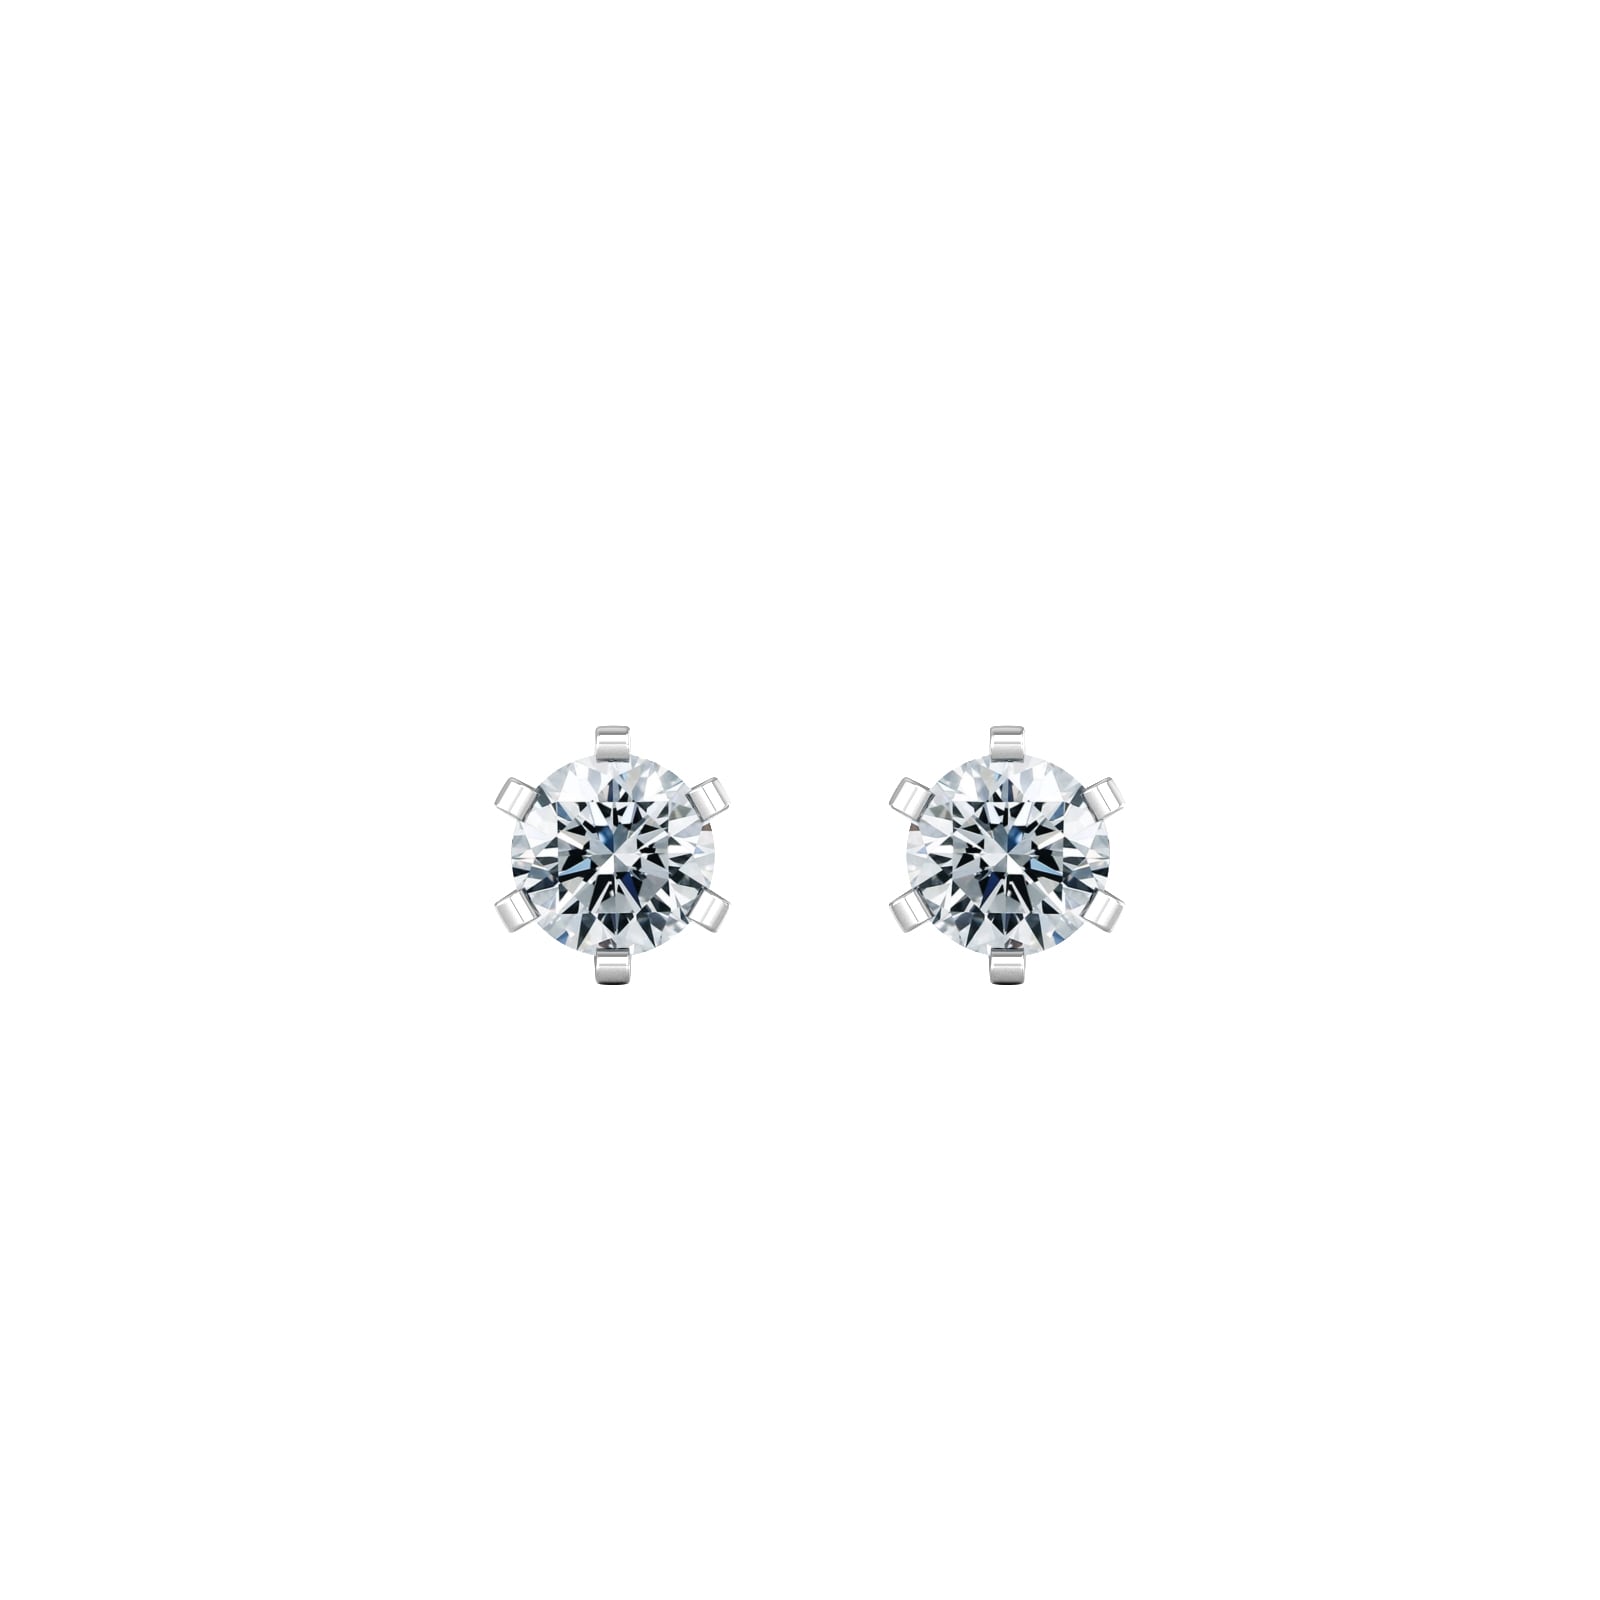 18ct White Gold 0.25cttw Solitaire Diamond Stud Earrings